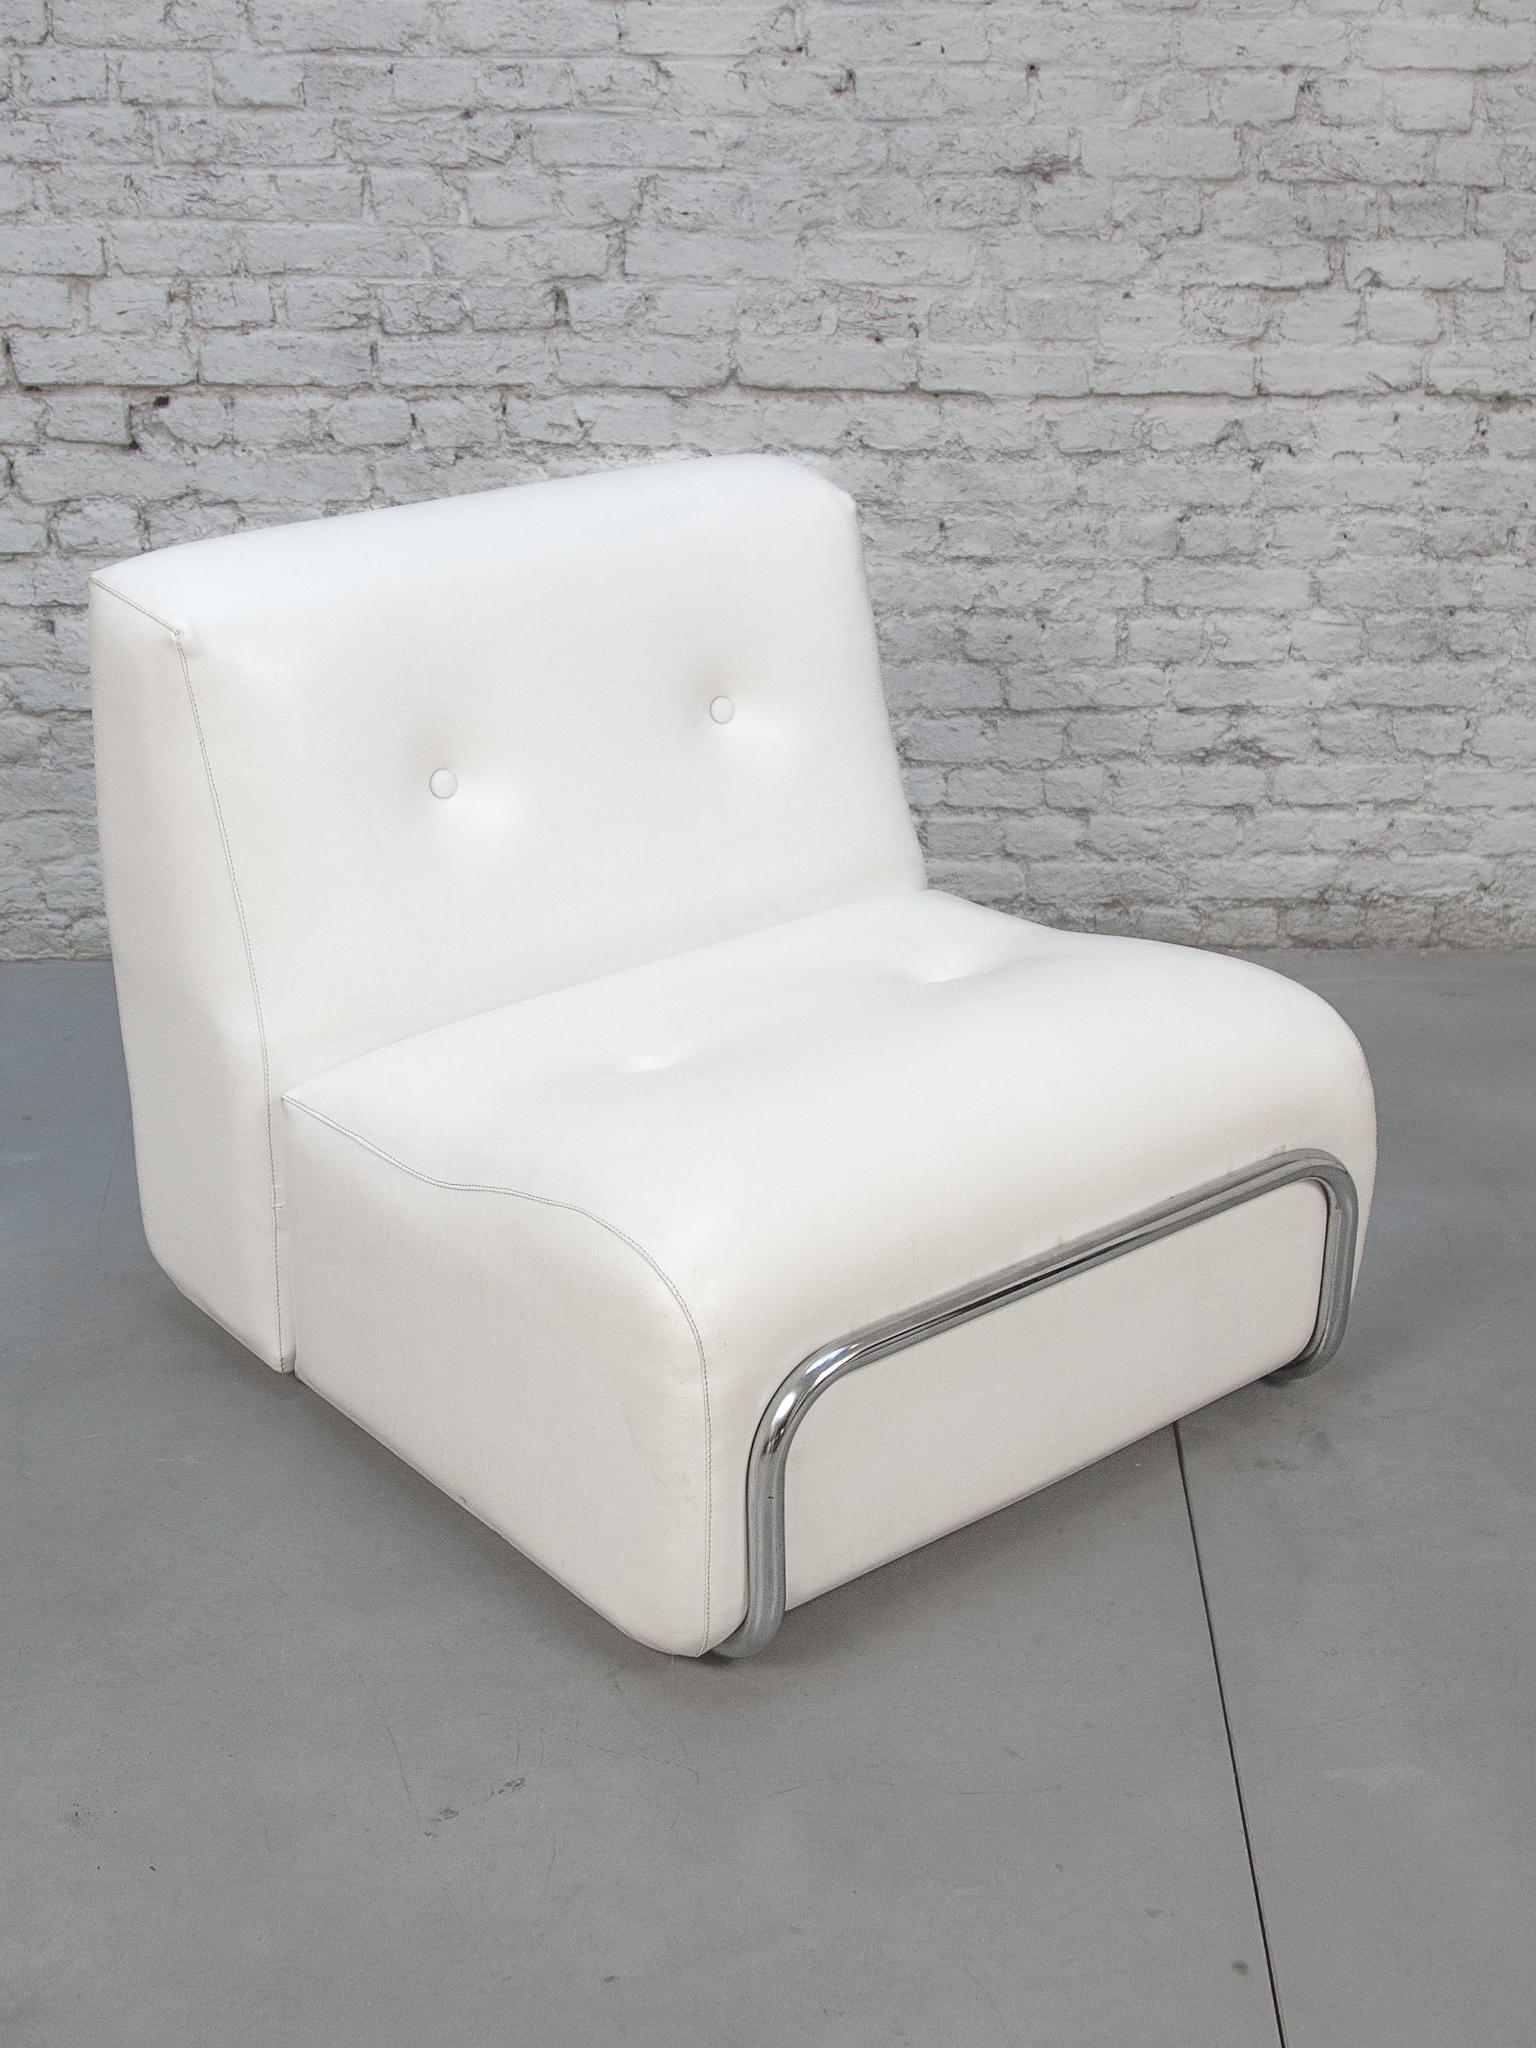 Mid-20th Century White and Chrome Livingroom set of Adriano Piazzesi Lounge Chairs and Footstools For Sale